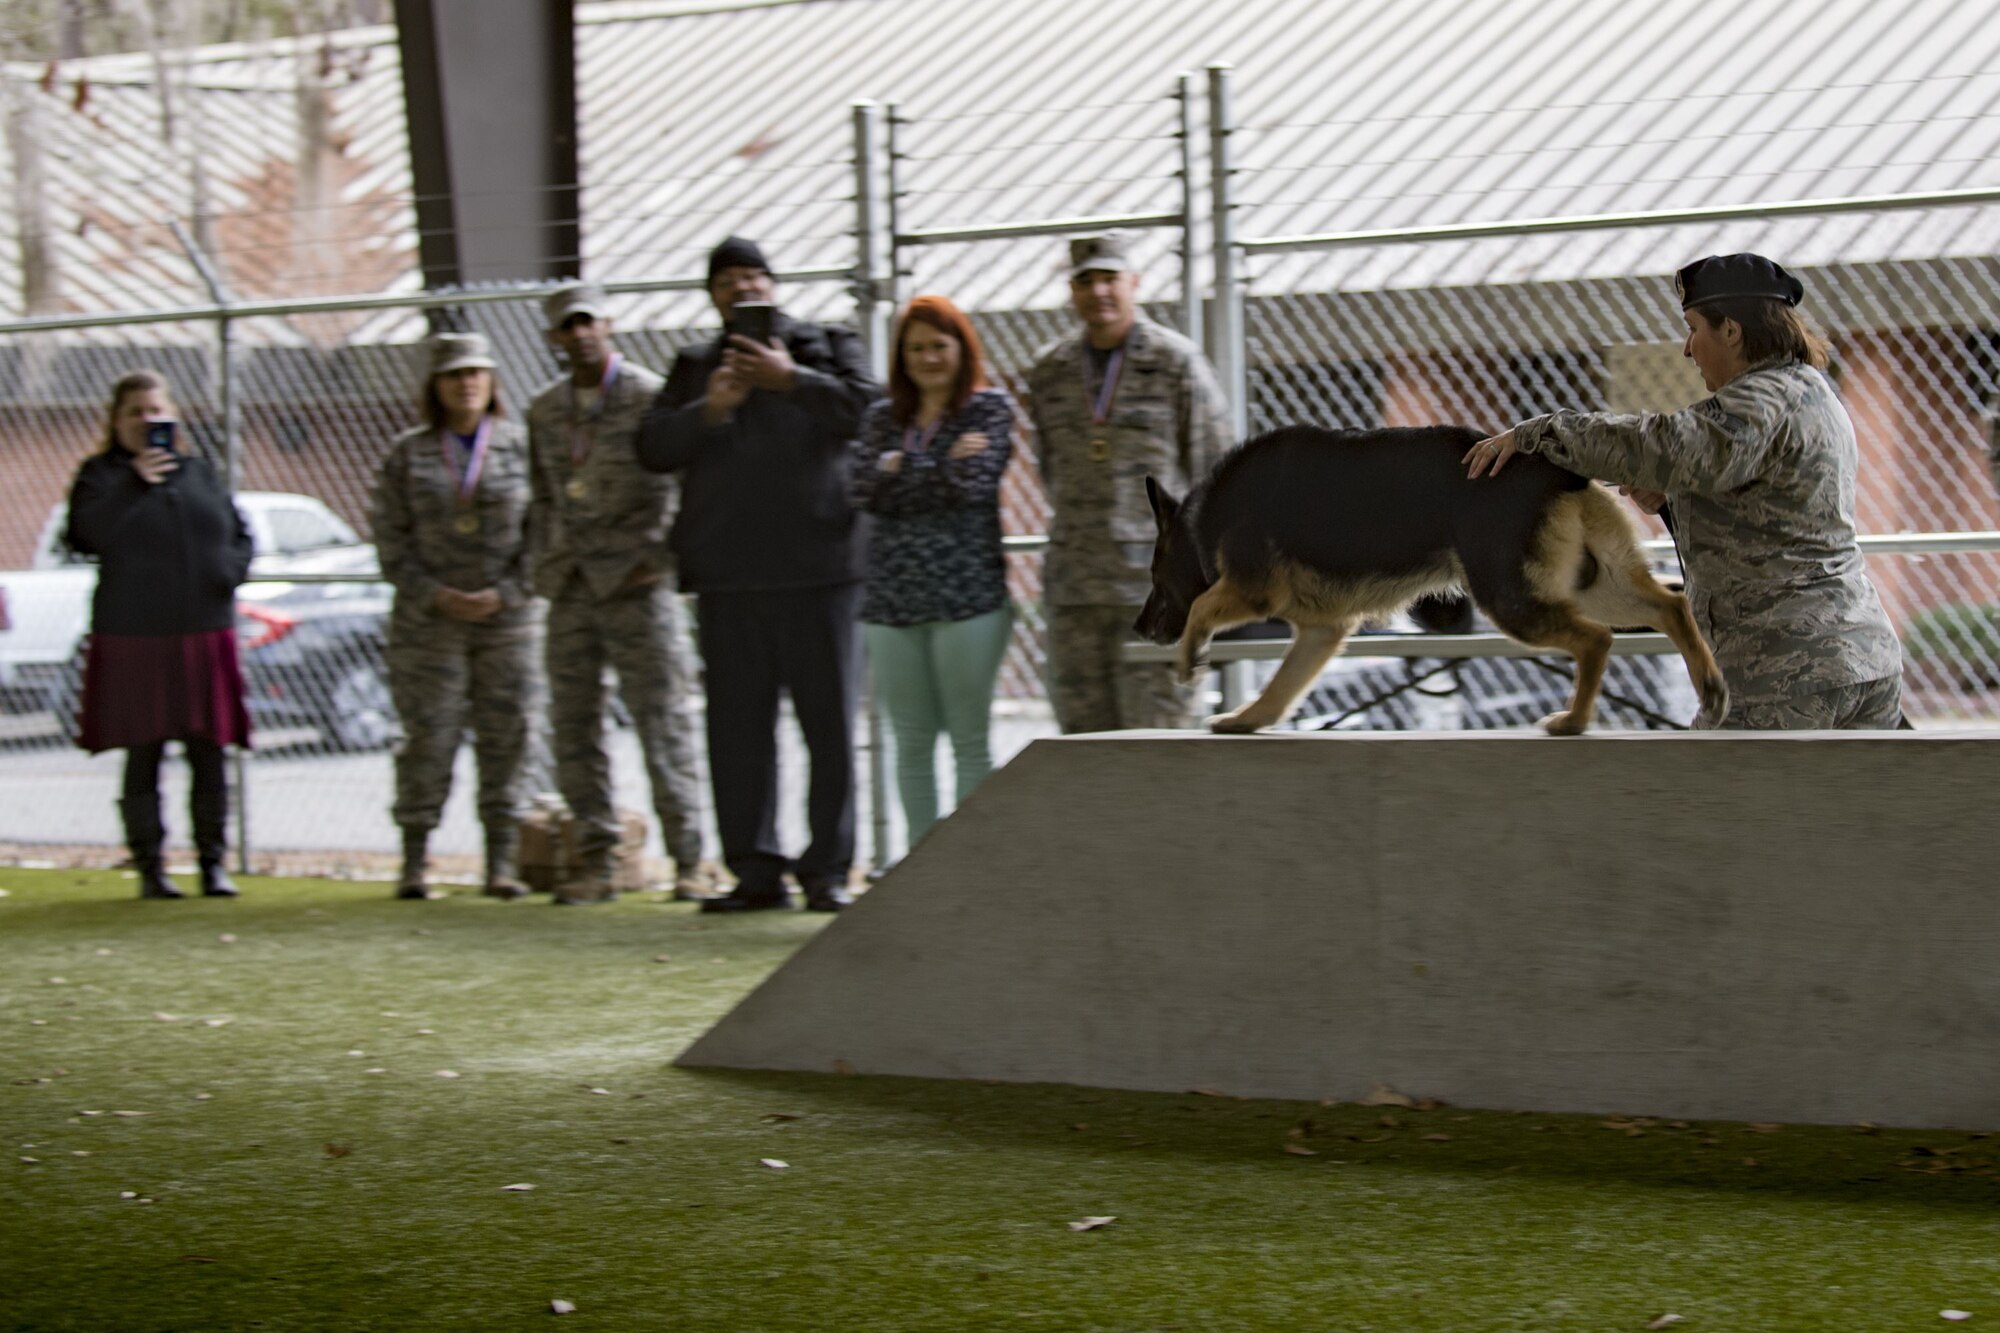 Senior Airman Ashlee Pollard, 23d Security Forces Squadron military working dog handler, directs MWD Falo through an obstacle course during a Tour of Champions, Feb. 2, 2018, at Moody Air Force Base, Ga. The Tour of Champions recognizes 23d Wing annual award nominees and an opportunity to gain a better perspective of the 23d Wing’s mission. (U.S. Air Force photo by Senior Airman Daniel Snider)